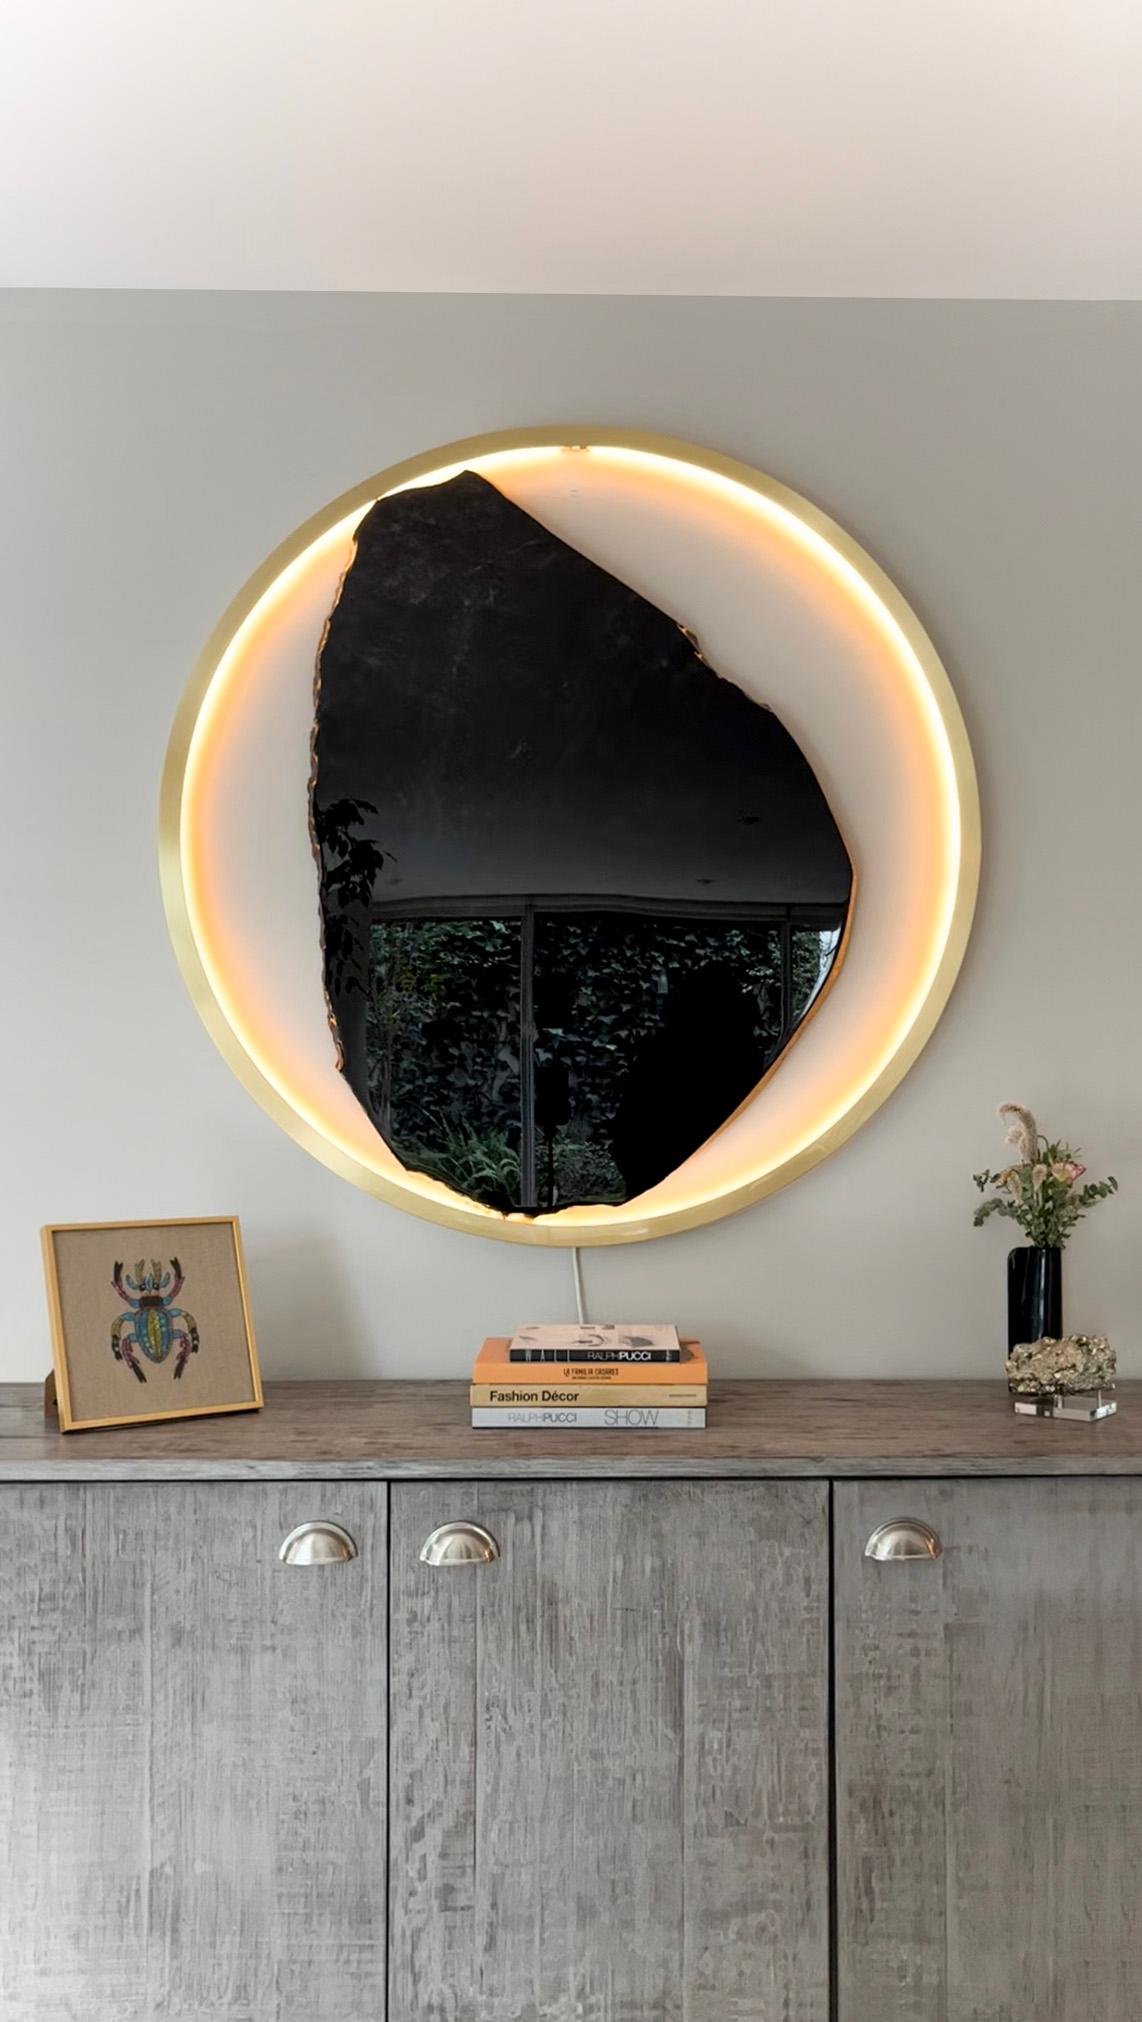 Solar Eclipse by Sten Studio


Ø 40 in or Ø 33.4 in
Obsidian, brass, LED

Brass and obsidian create a dynamic interplay of light and shadow in this piece in which the former material represents the Sun and, the latter, the Moon. While, as a